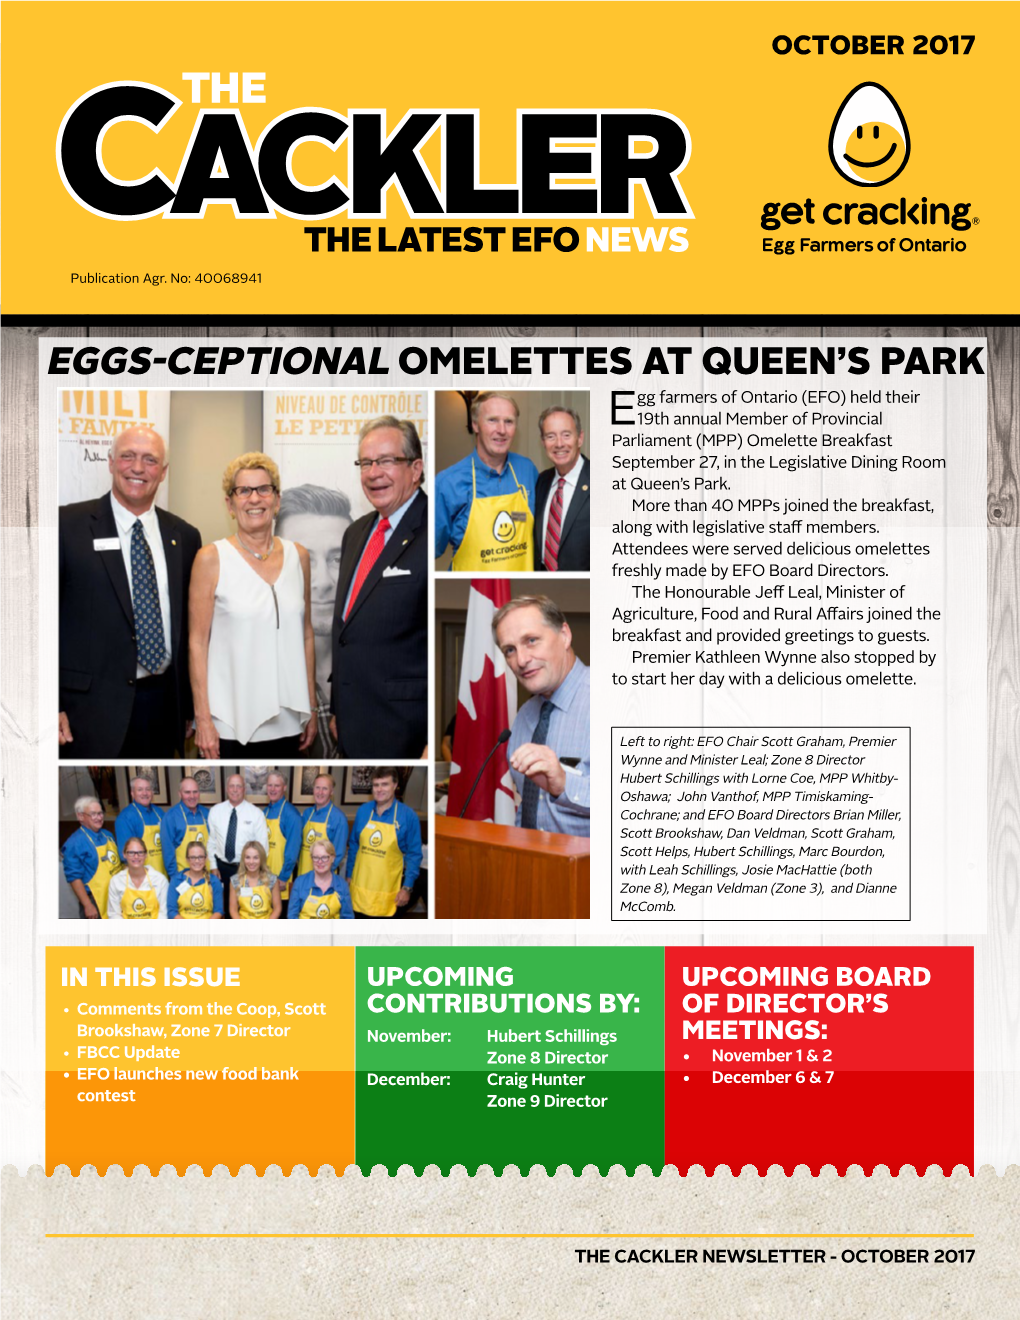 Eggs-Ceptional Omelettes at Queen's Park